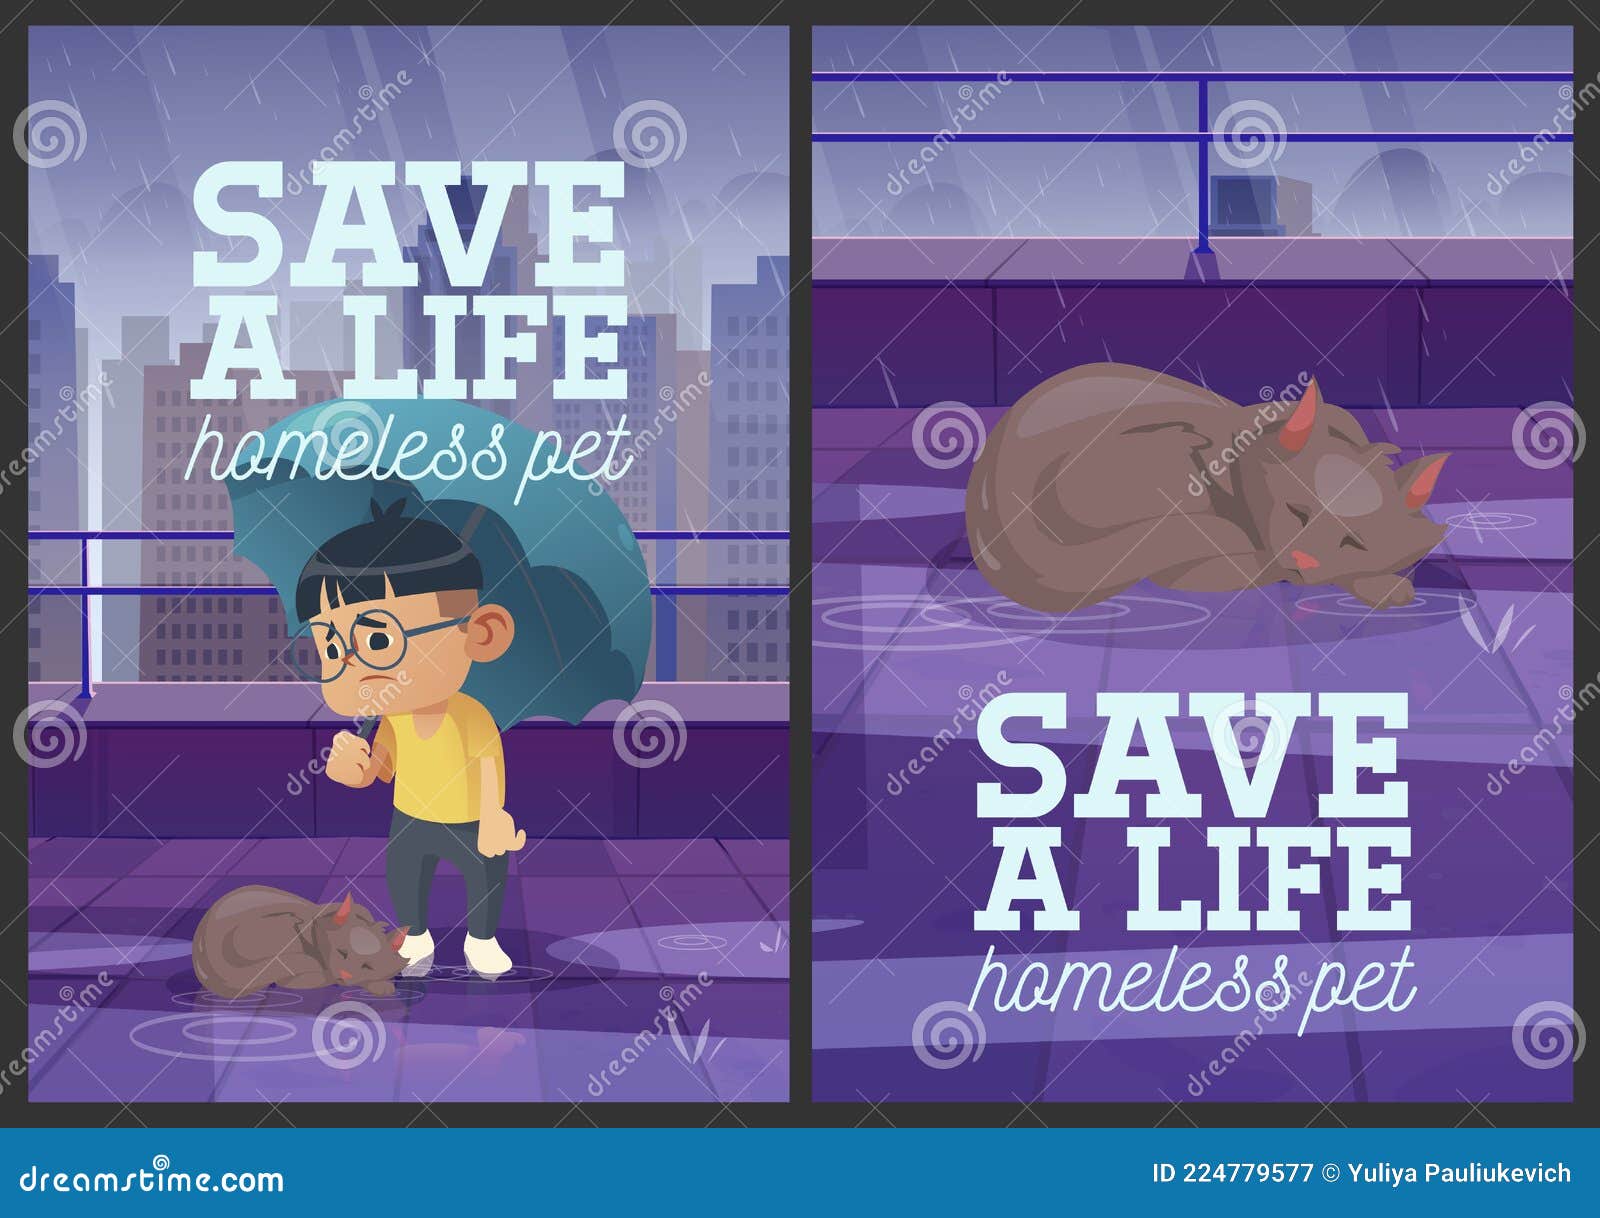 Save a Life Homeless Pet Cartoon Posters Design Stock Vector - Illustration  of charity, kind: 224779577